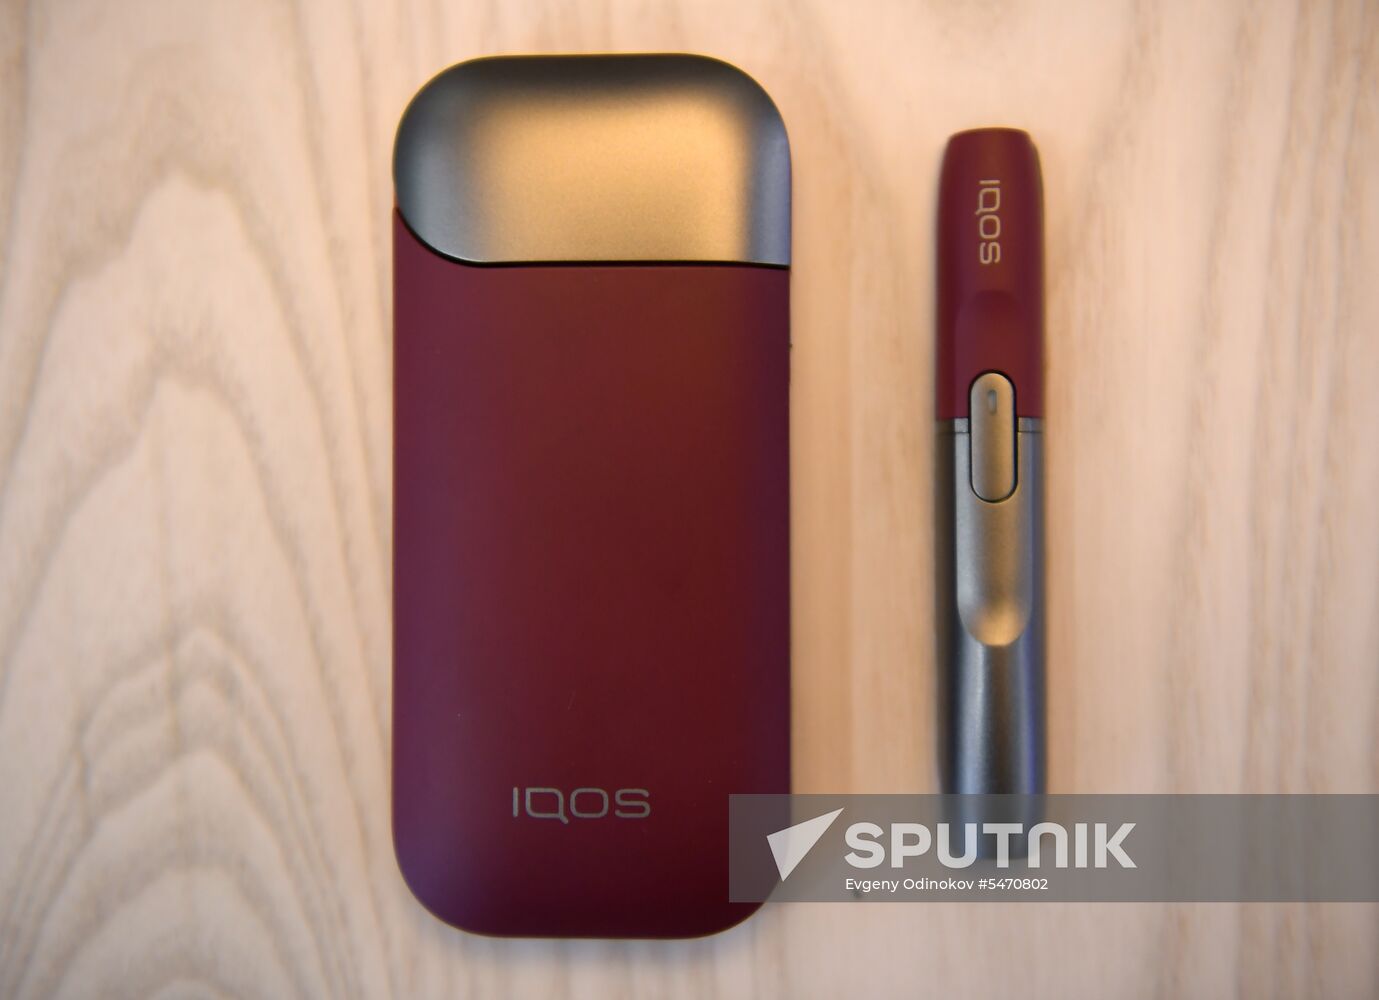 IQOS tobacco heating system